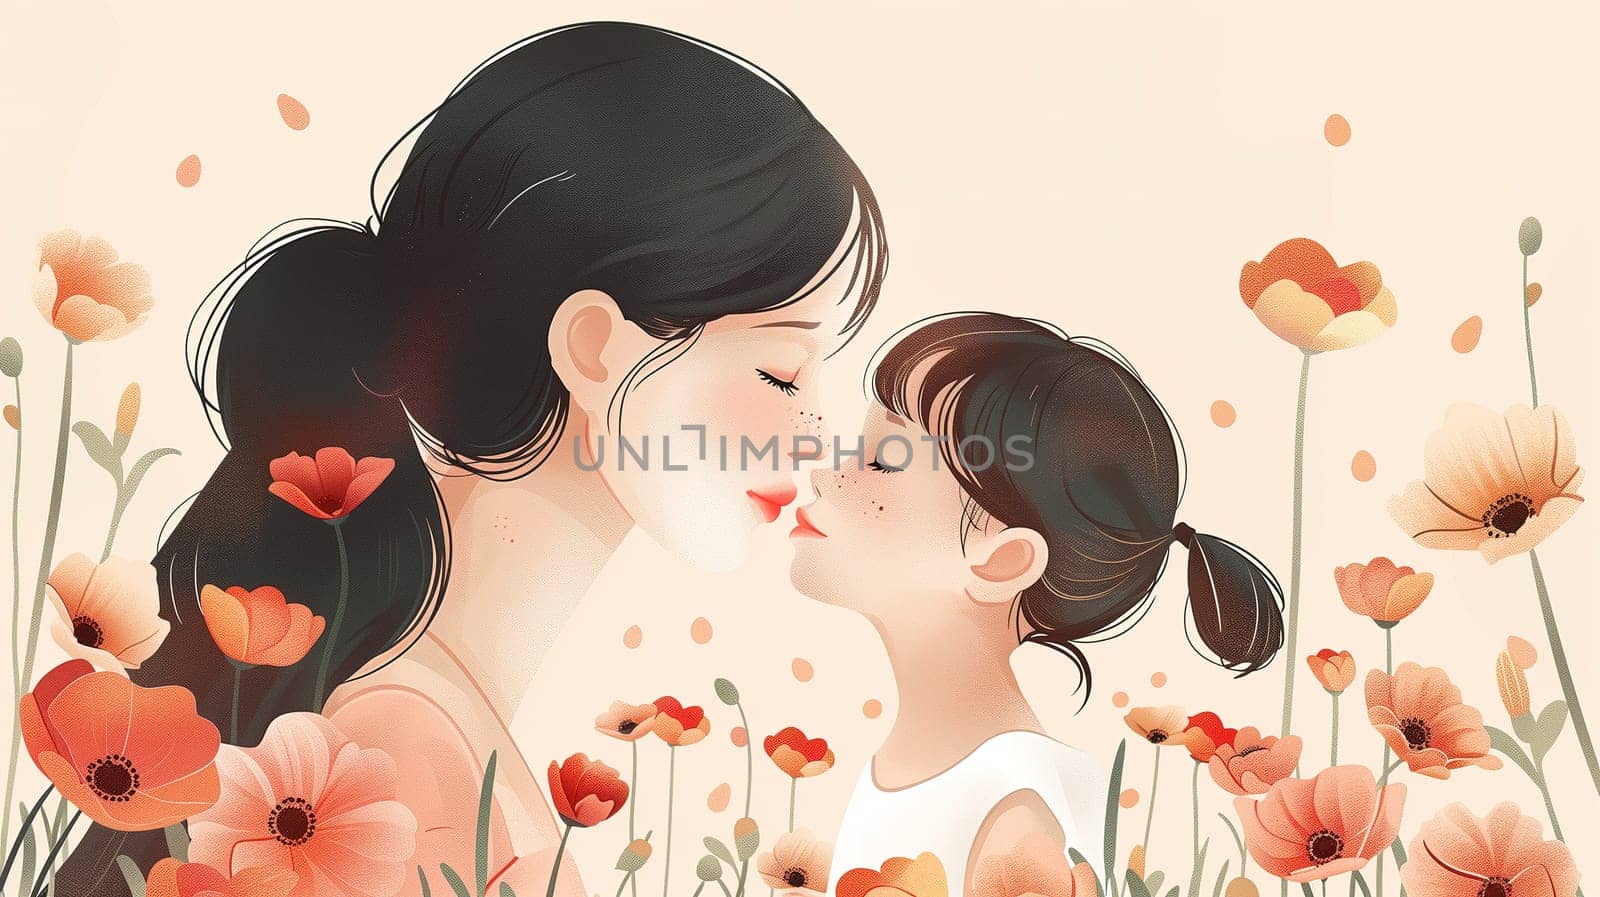 A mother and her daughter share a tender moment, kissing each others cheeks while standing in a field of colorful flowers. The bright blooms provide a vibrant backdrop for the heartwarming scene.